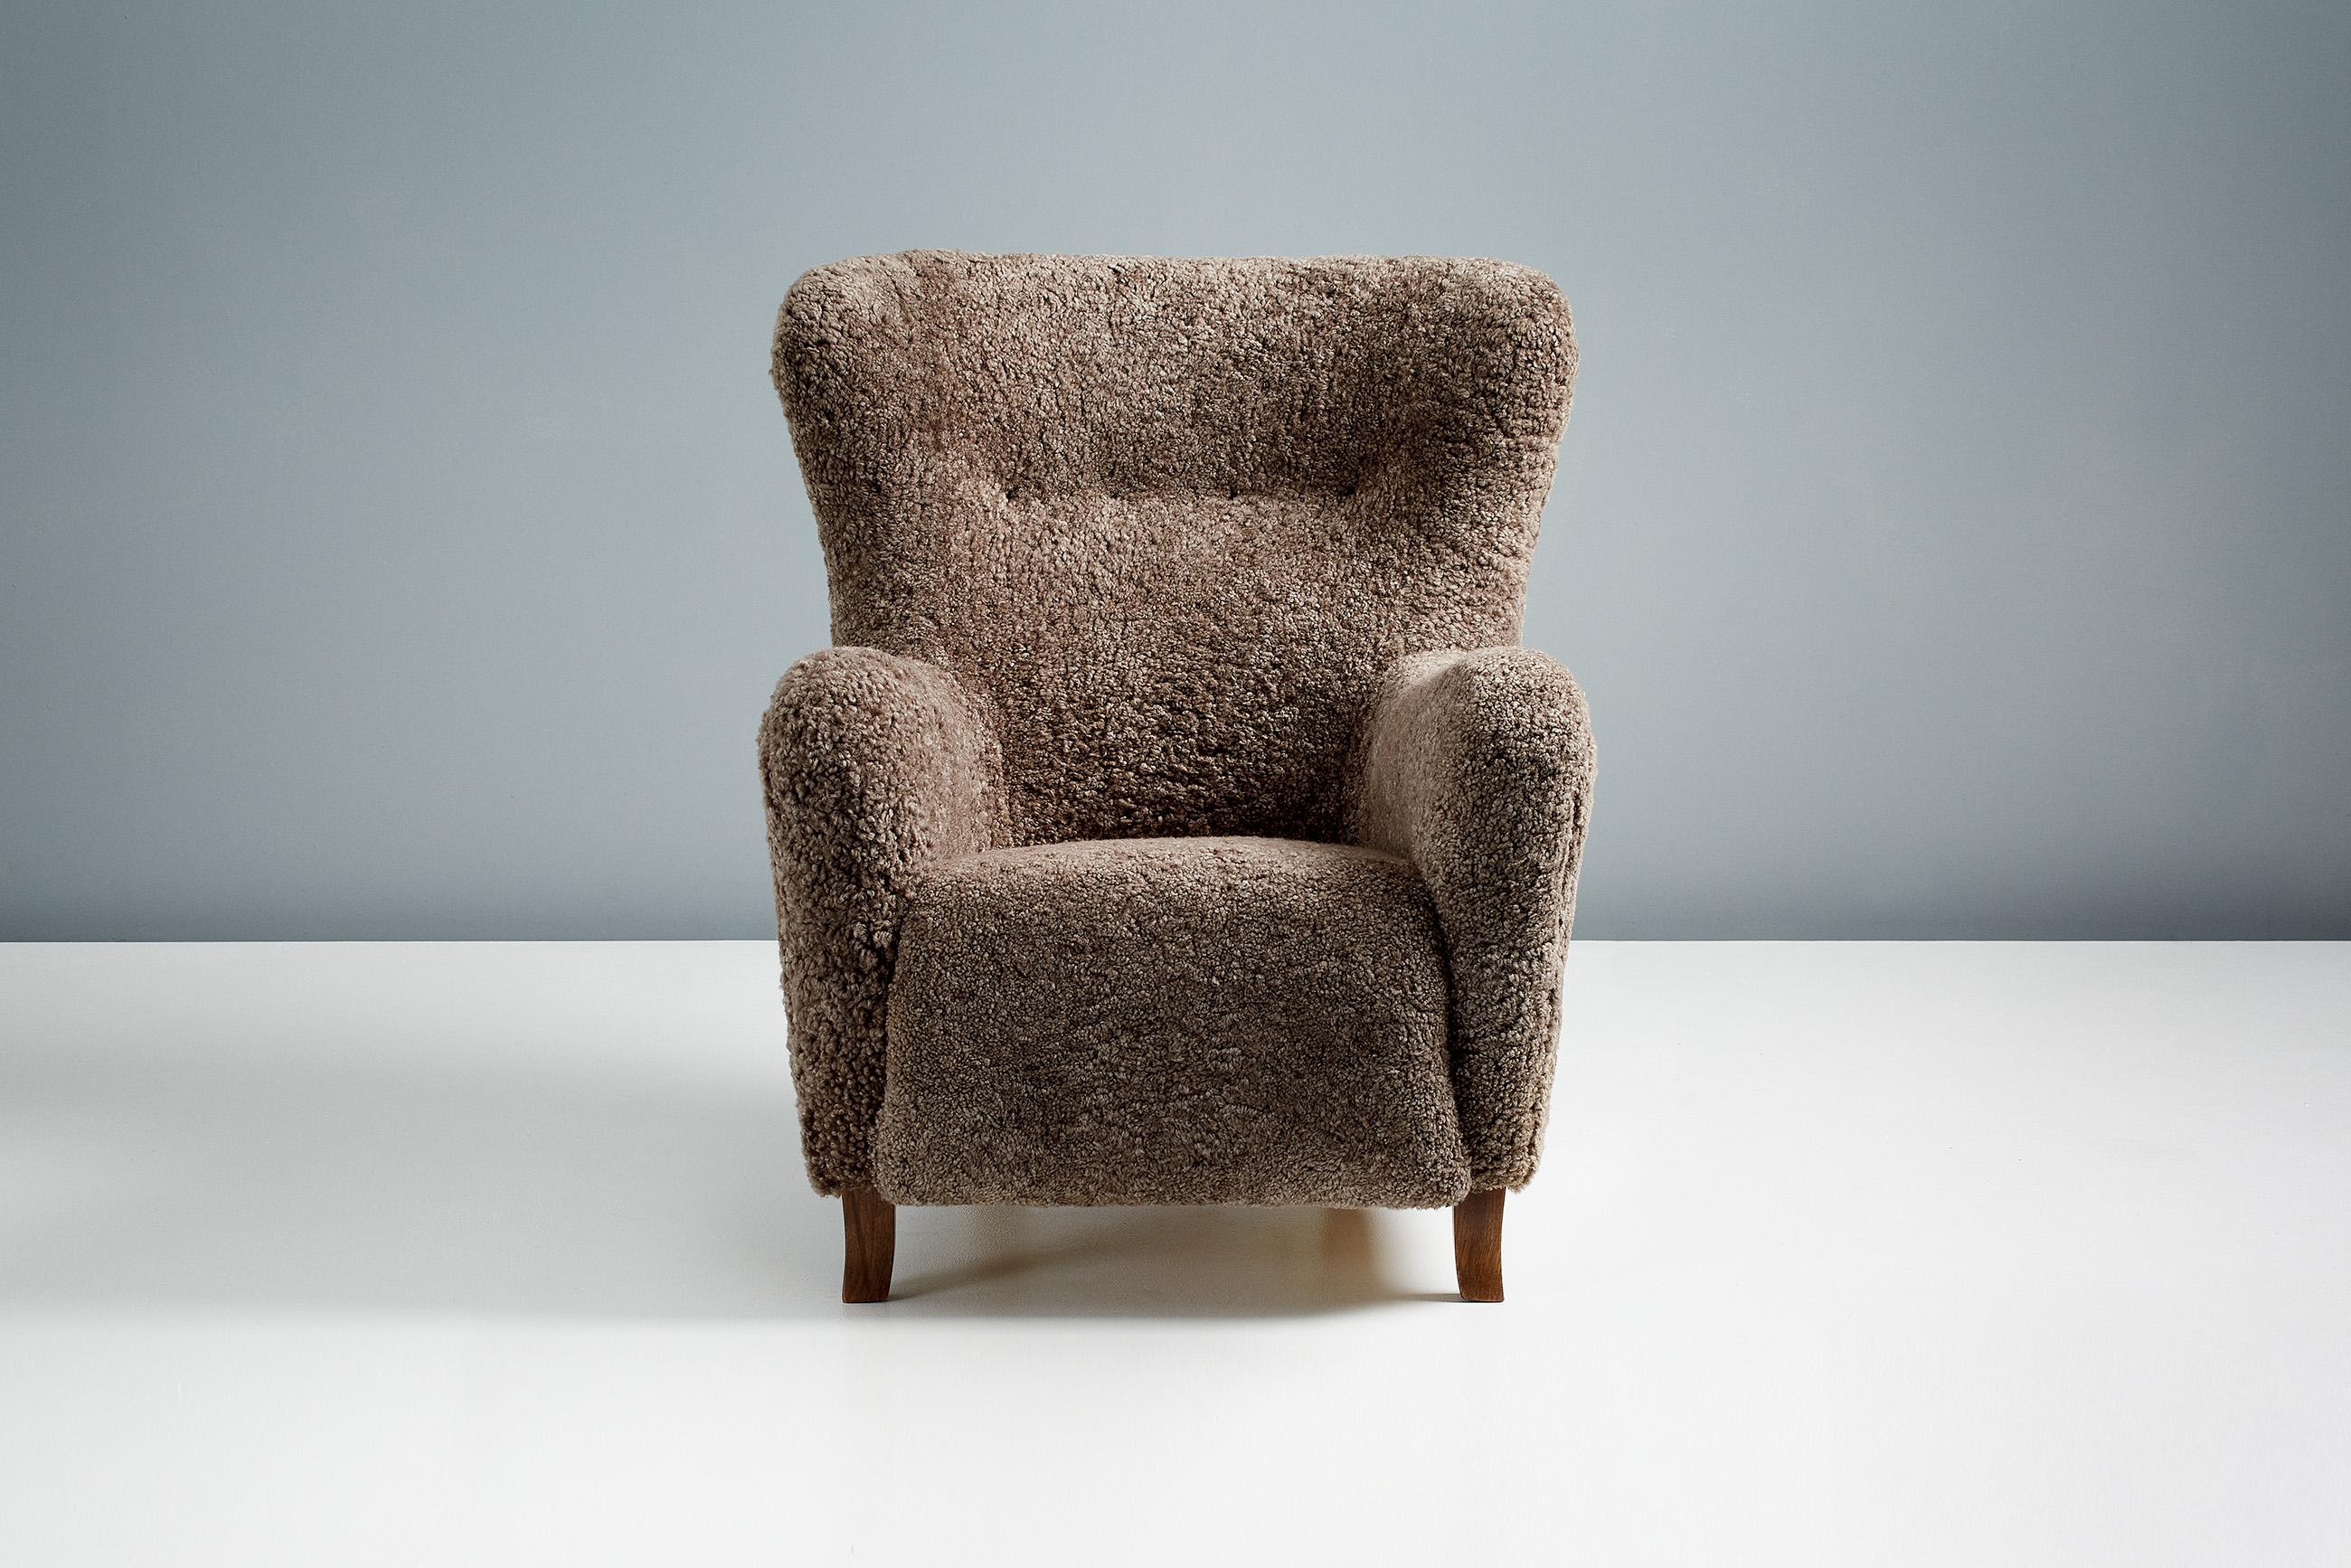 Dagmar Design

Sampo Wing chair

A custom-made wing chair developed & produced at our workshops in London using the highest quality materials. The frame is built from solid tulipwood with a fully sprung seat. These examples are upholstered in